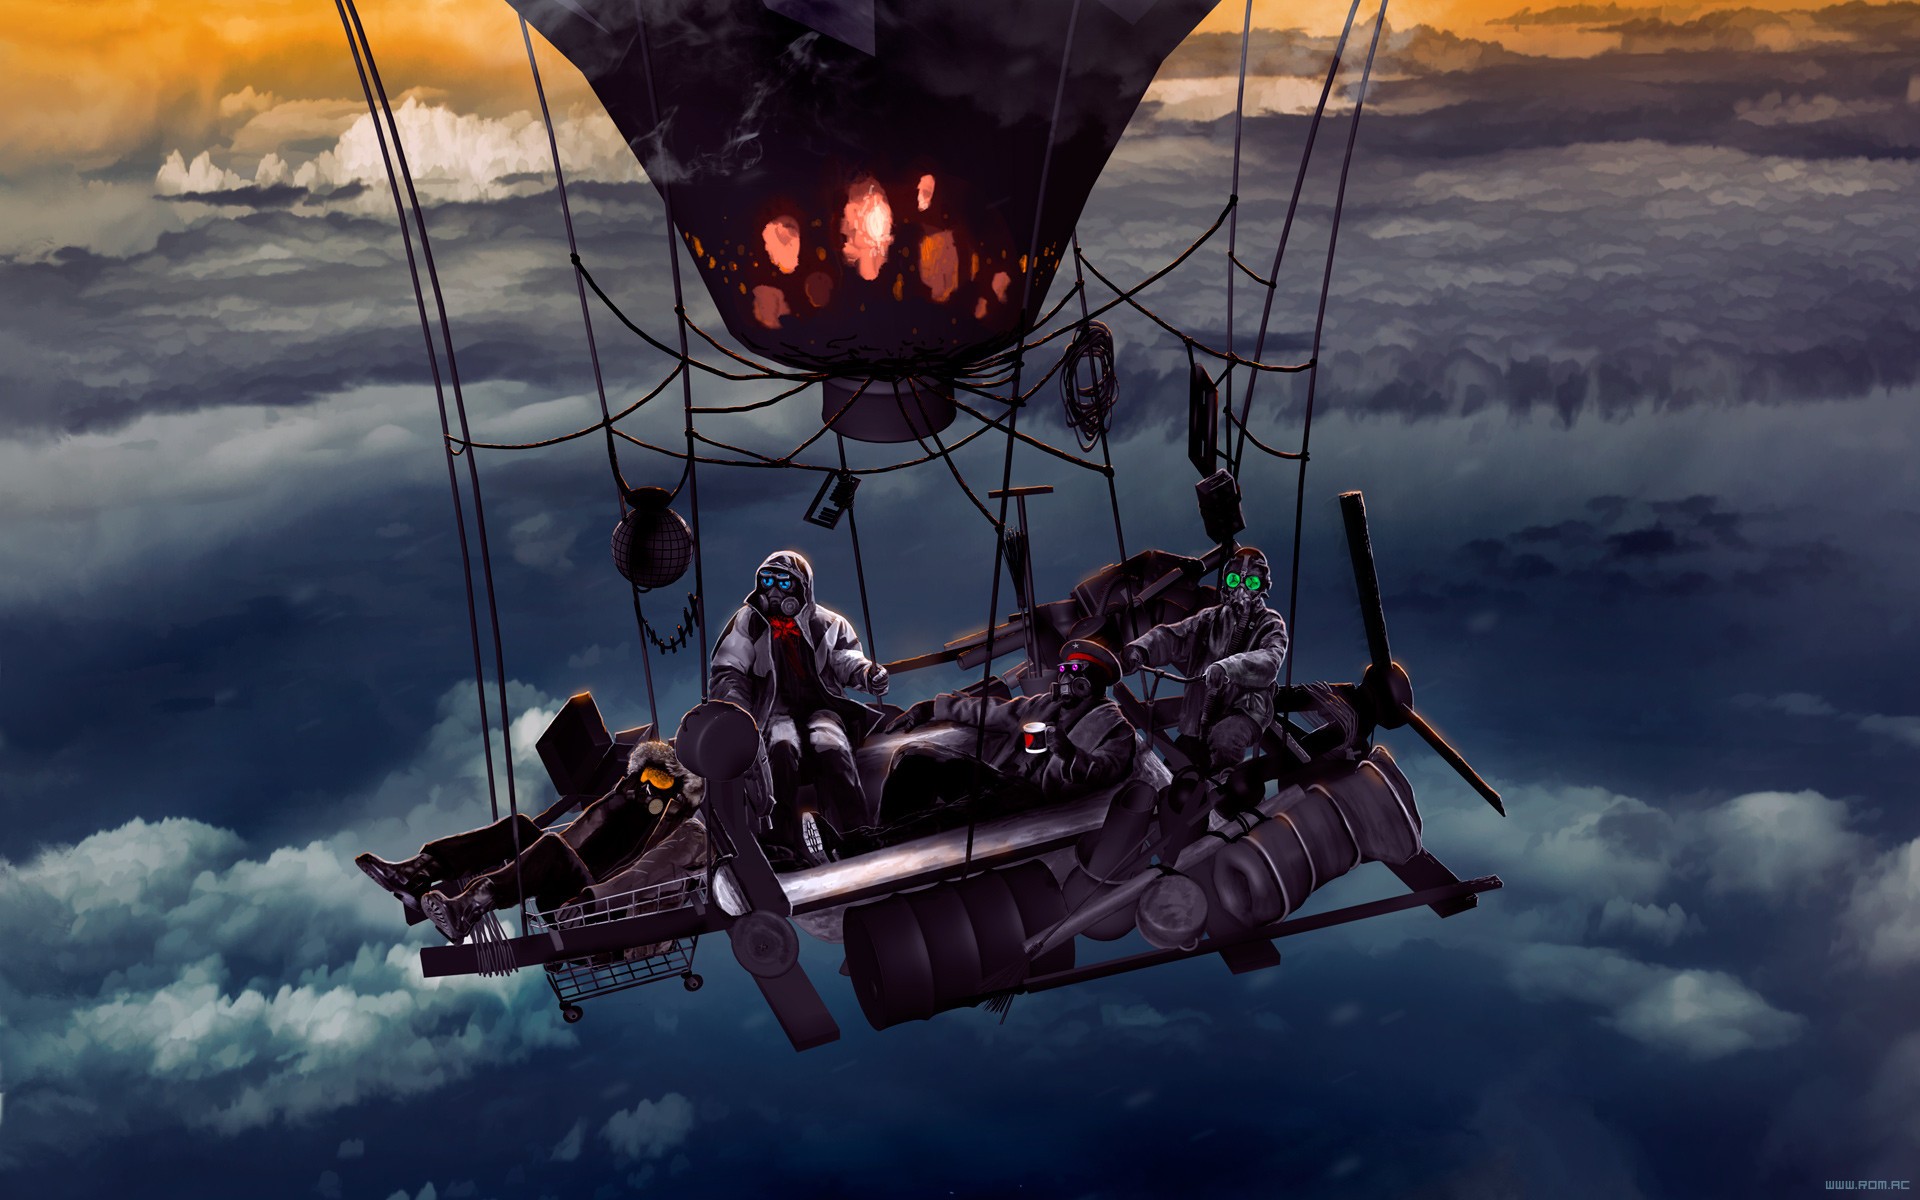 Romantically Apocalyptic, Hot Air Balloons, Clouds, Vitaly S Alexius Wallpaper